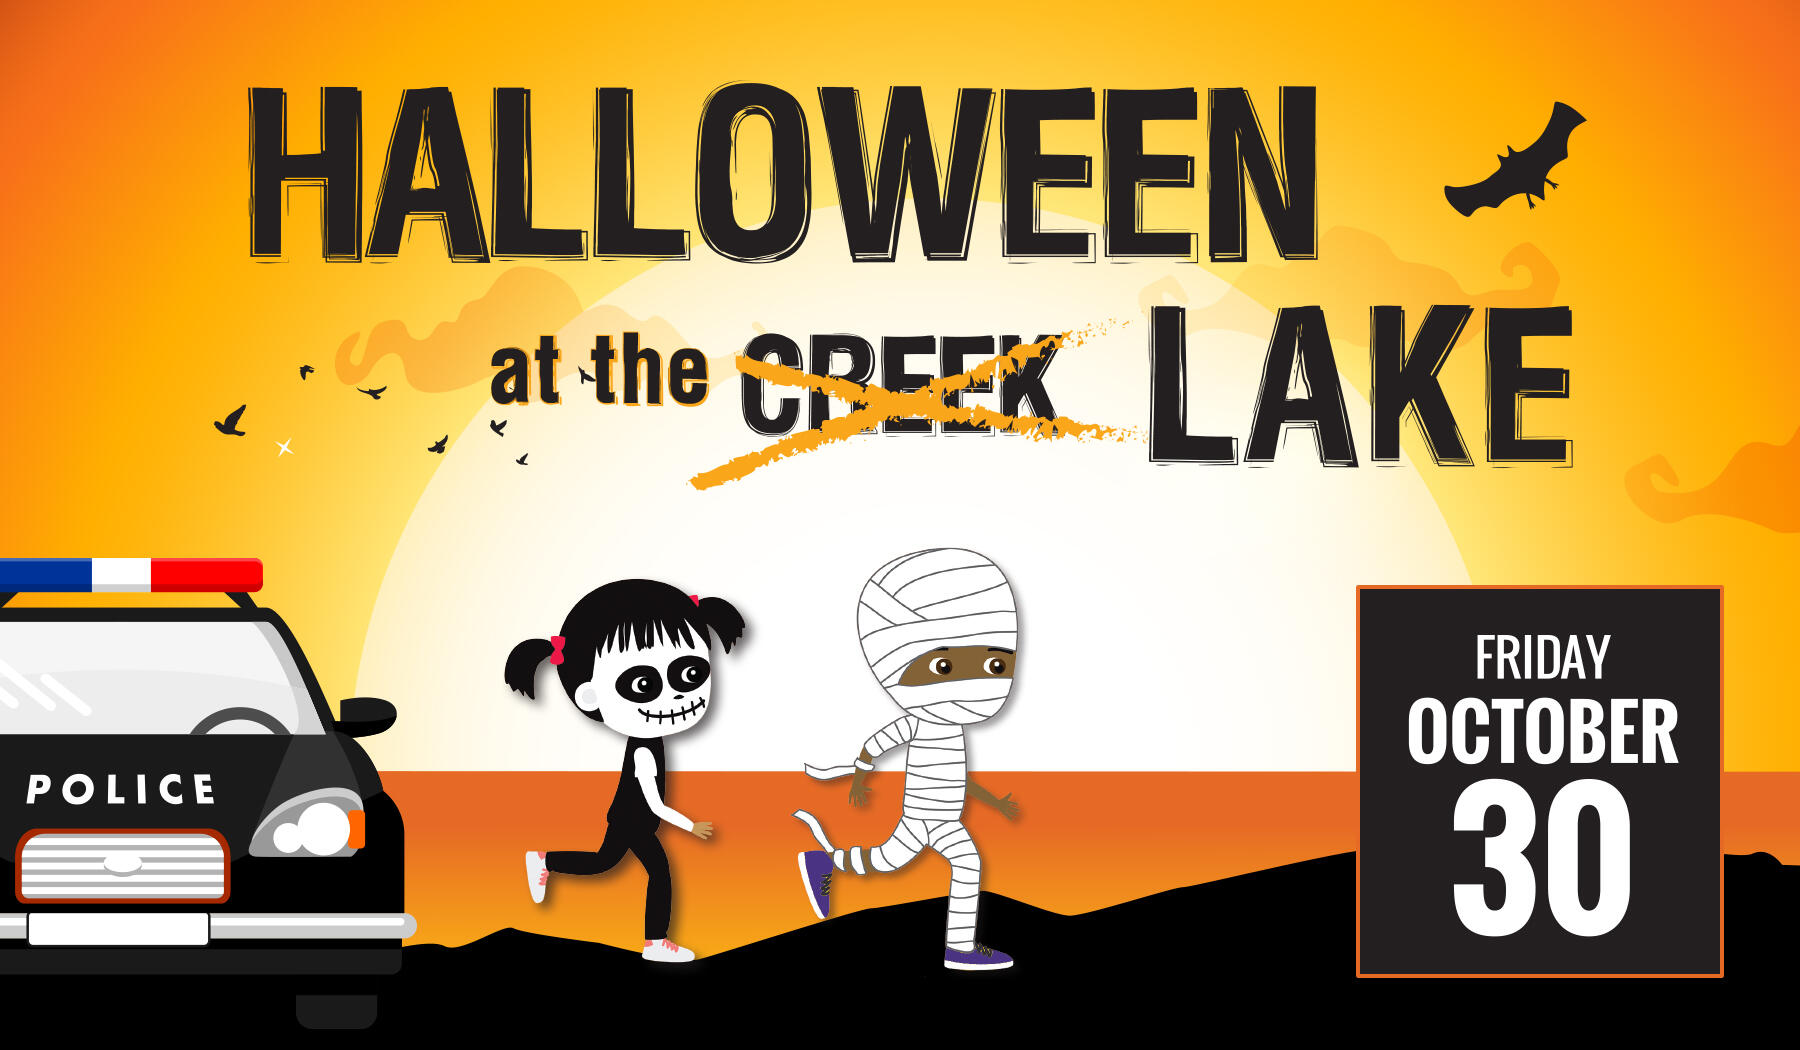 Plymouth holds walkthrough Halloween at the Lake event Oct. 30 (City